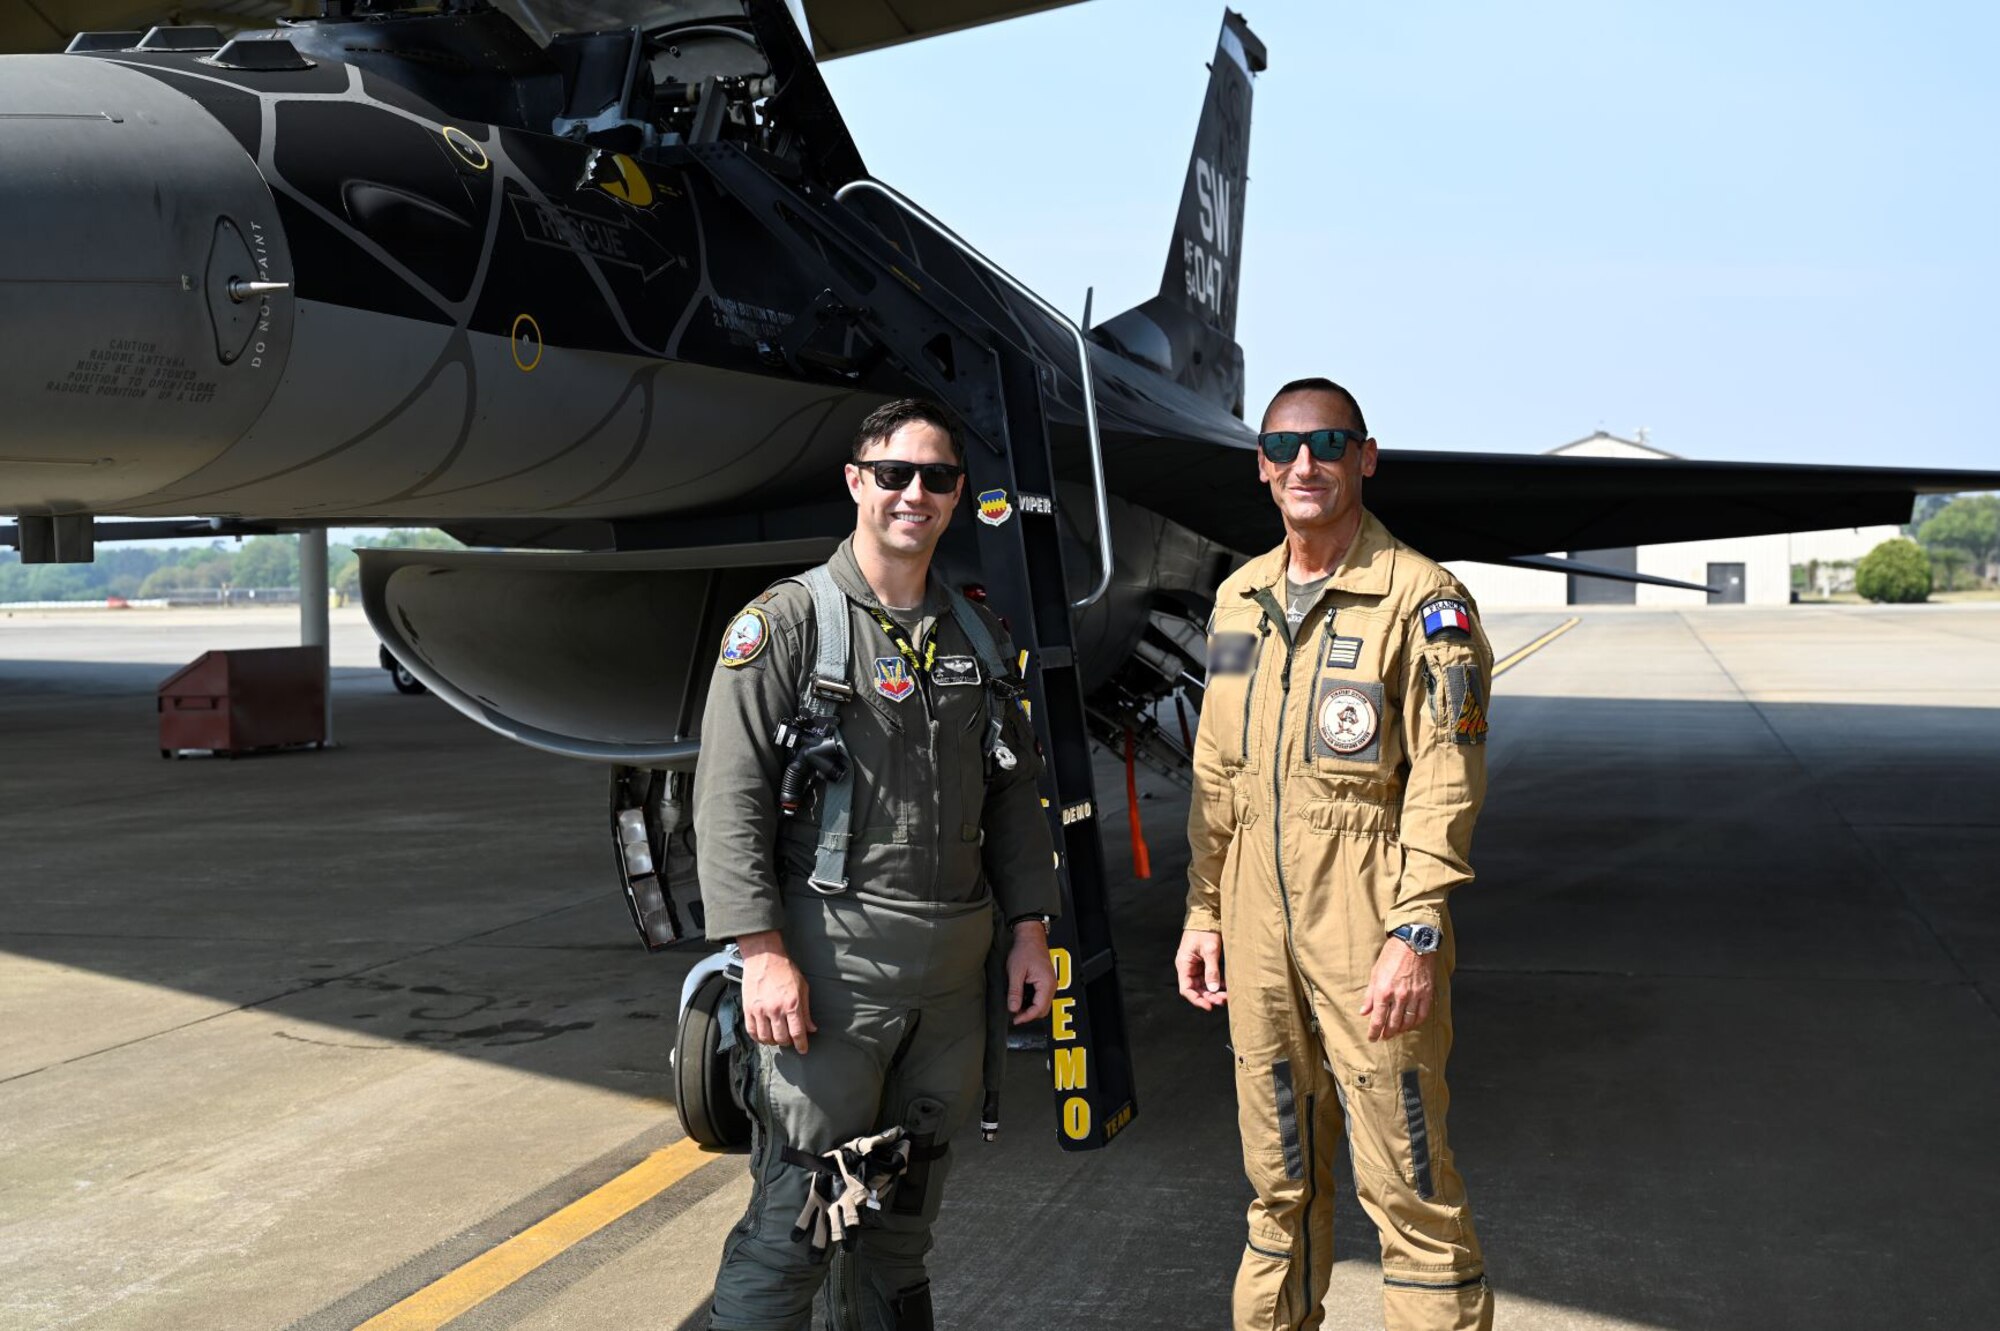 Maj. Garret Schmitz, F-16 Viper Demonstration Team commander and pilot, poses with a member from the French Air and Space Force at Shaw Air Force Base, South Carolina, April 8, 2021. Senior military representatives from nine countries traveled to Shaw AFB this week to participate in “Coalition Week,” a series of events focused on showcasing 9th Air Force’s (U.S. Air Forces Central) ability to distribute operations and command and control airpower from more than one location. (U.S. Air Force photo by Tech. Sgt. E’Lysia Wray/Released)